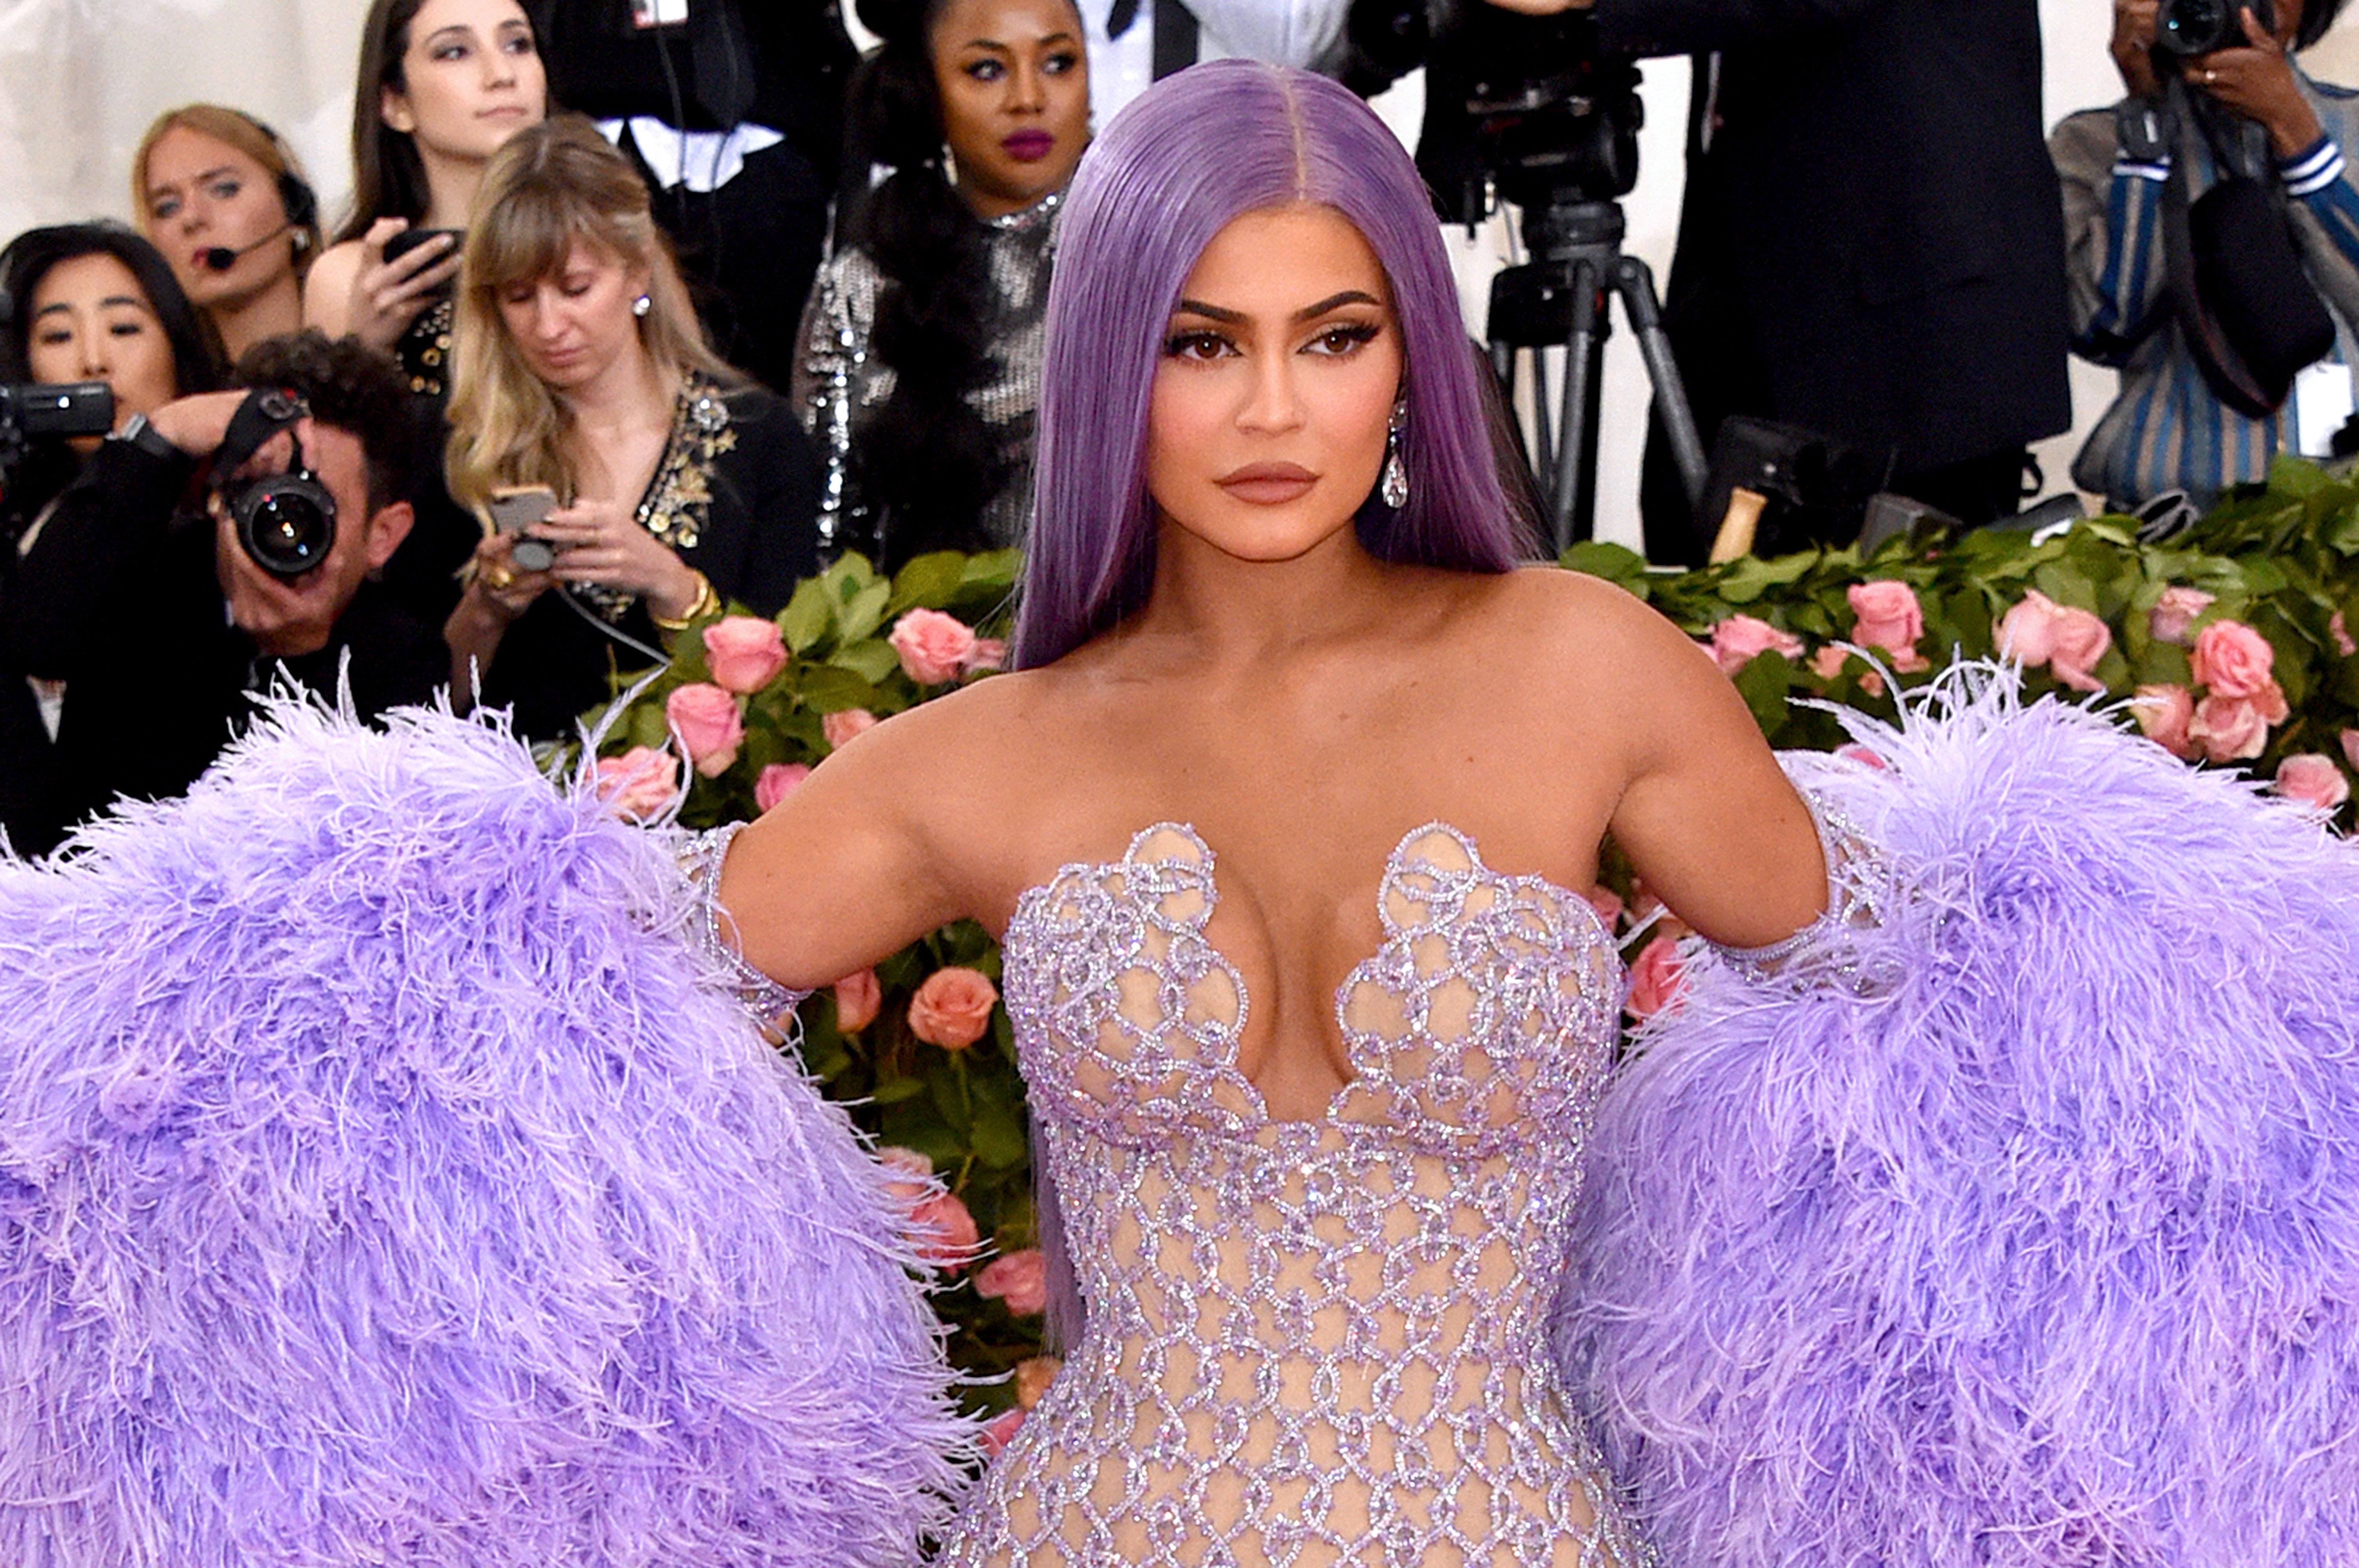 Kylie Jenner at the 2019 Met Gala "Celebrating Camp: Notes on Fashion" at Metropolitan Museum of Art on May 06, 2019. | Photo: Getty Images